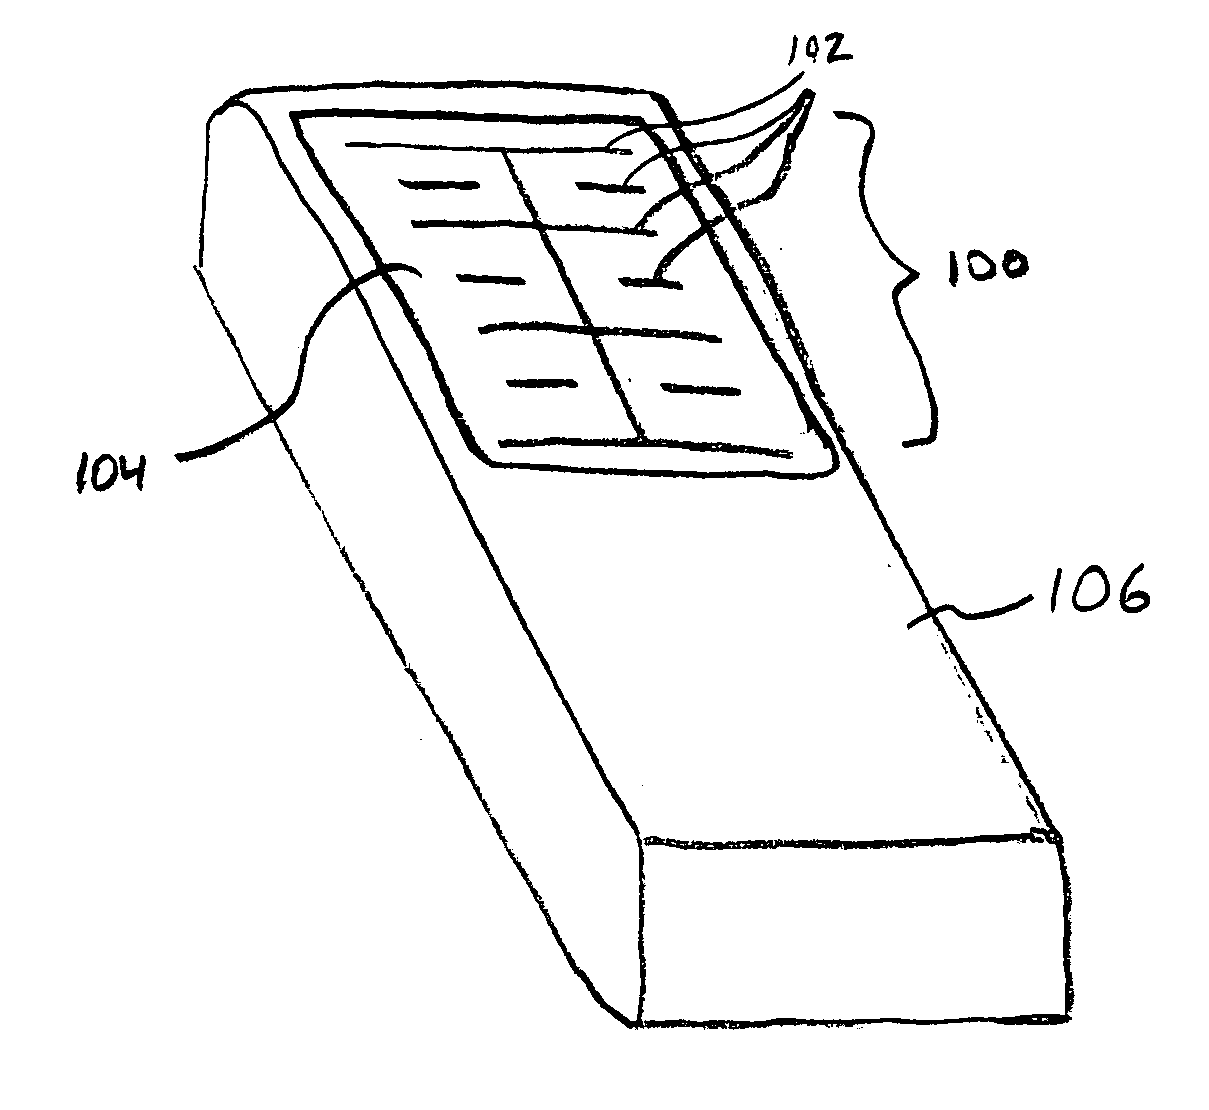 Single-layer touchpad having touch zones